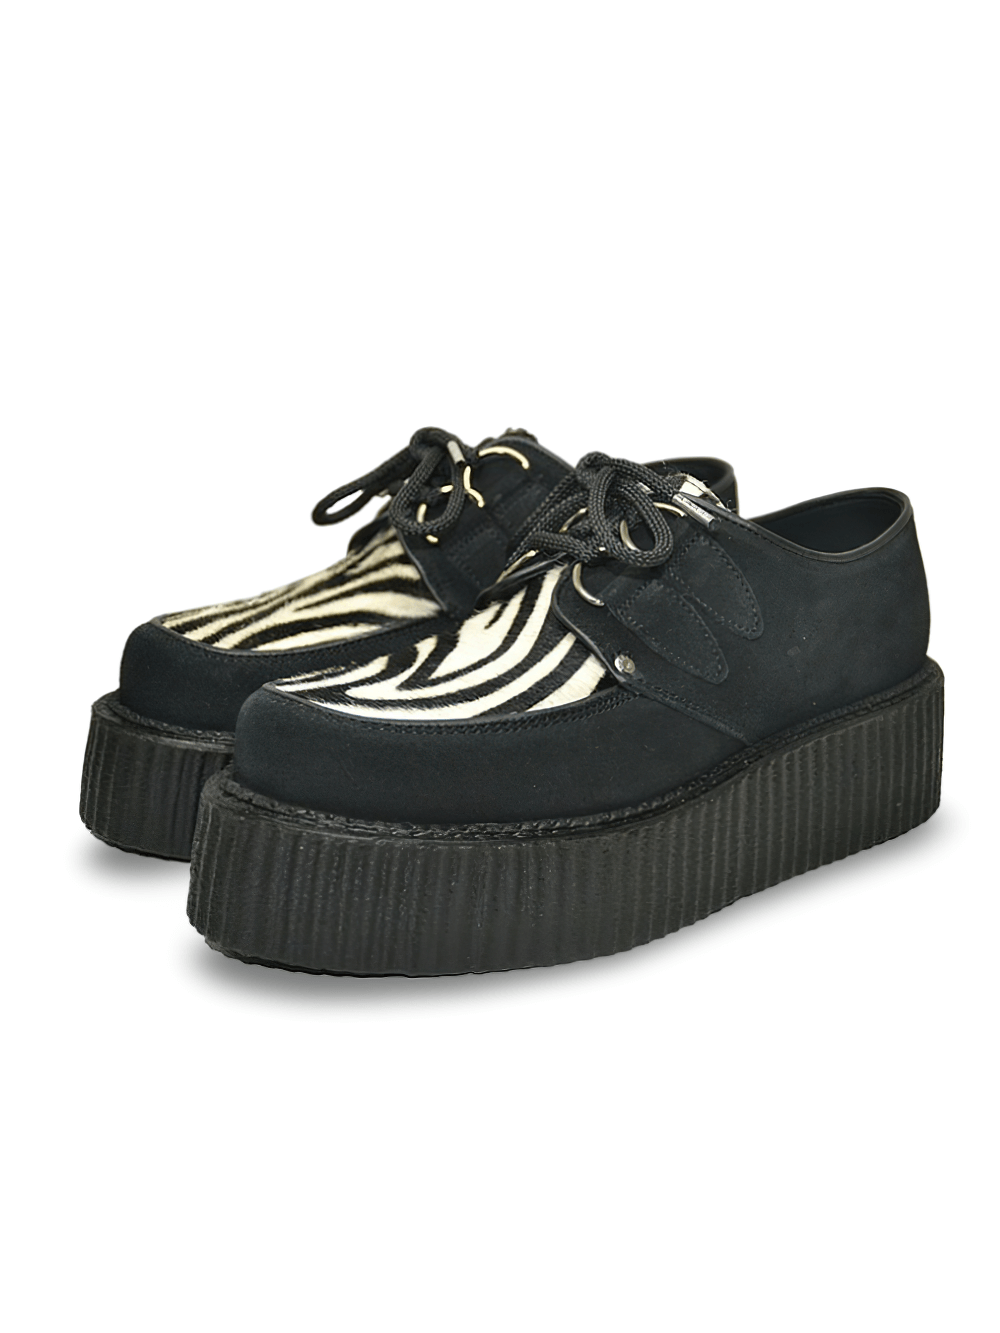 Black And White Zebra Creepers with Double Sole